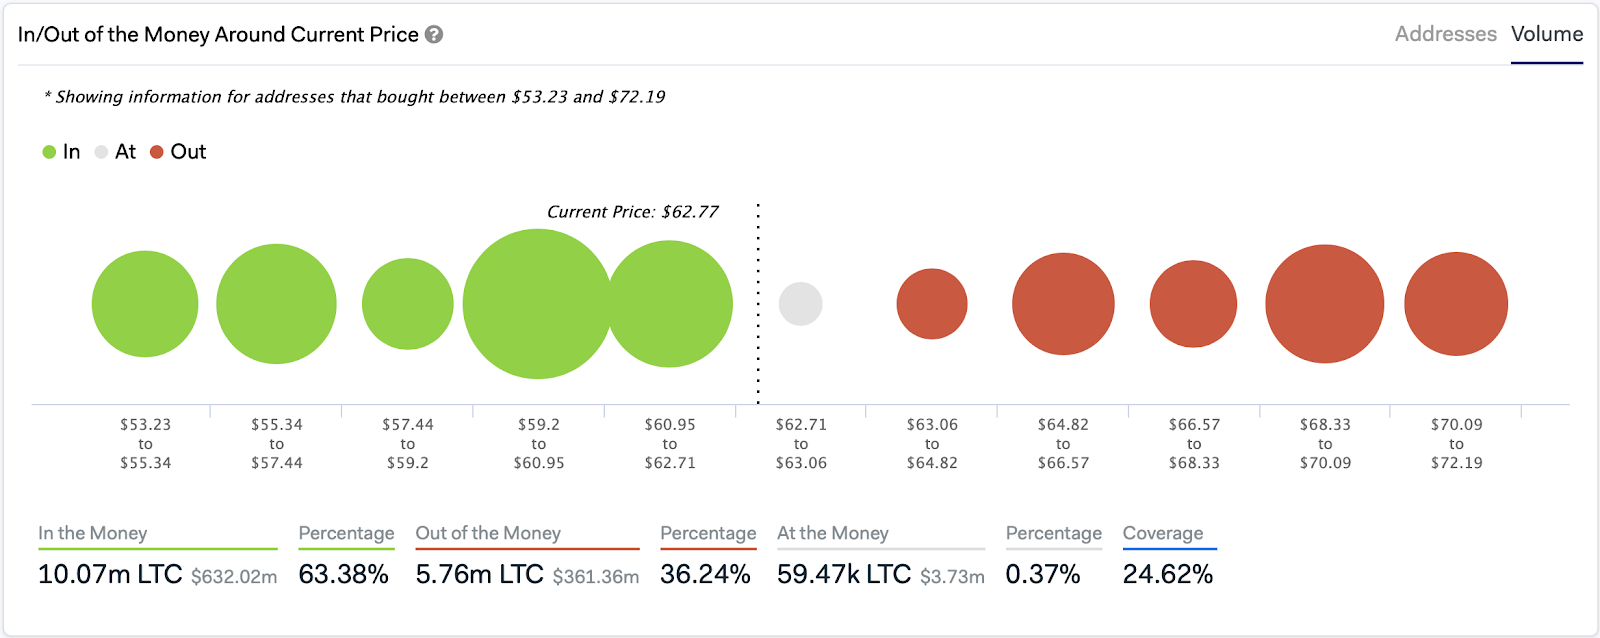 Litecoin In/Out of the Money Around Current Price. Source: IntoTheBlock